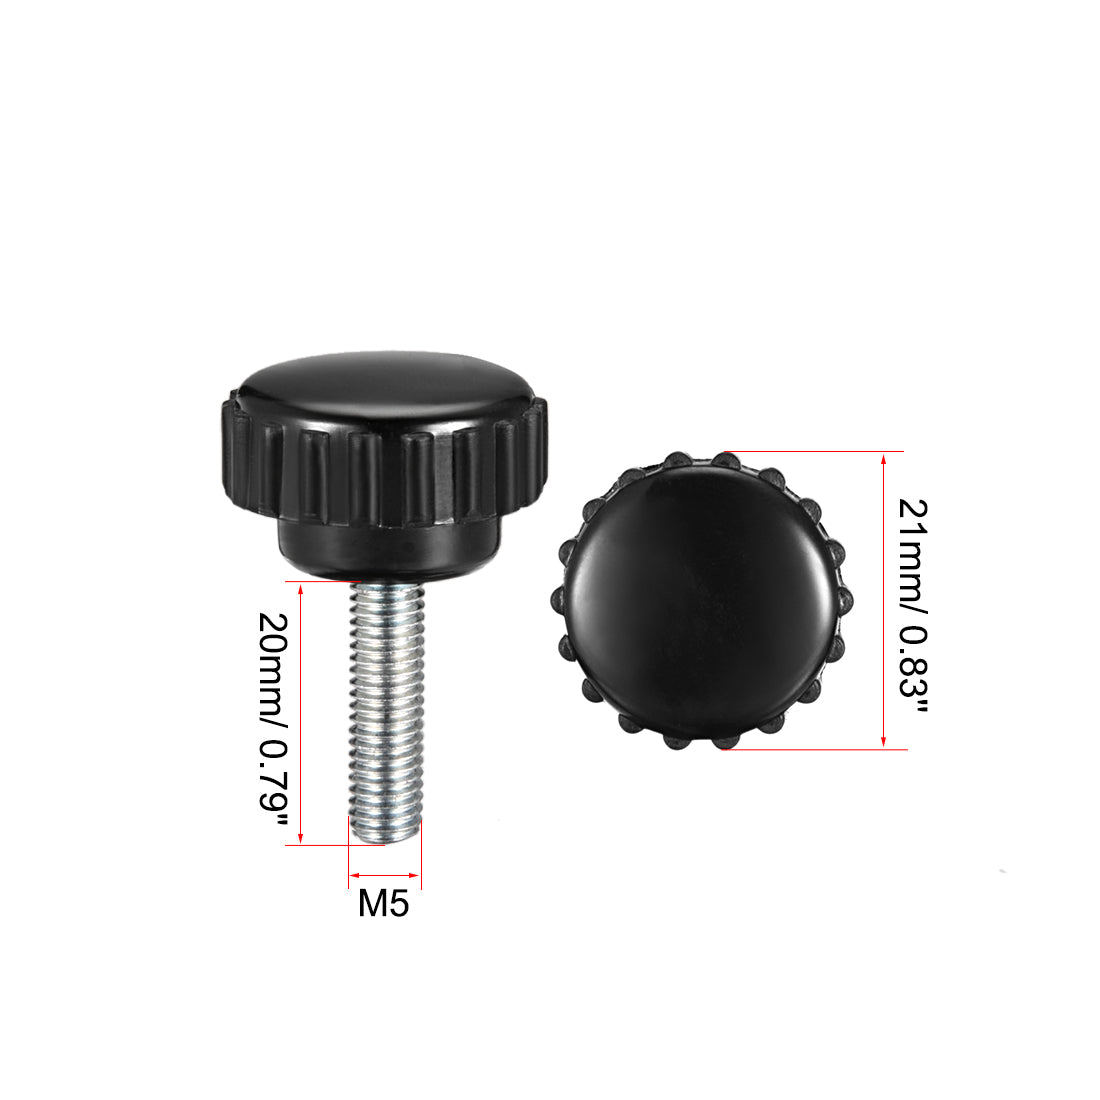 Uxcell Uxcell M4 x 30mm Male Thread Knurled Clamping Knobs Grip Thumb Screw on Type  8 Pcs